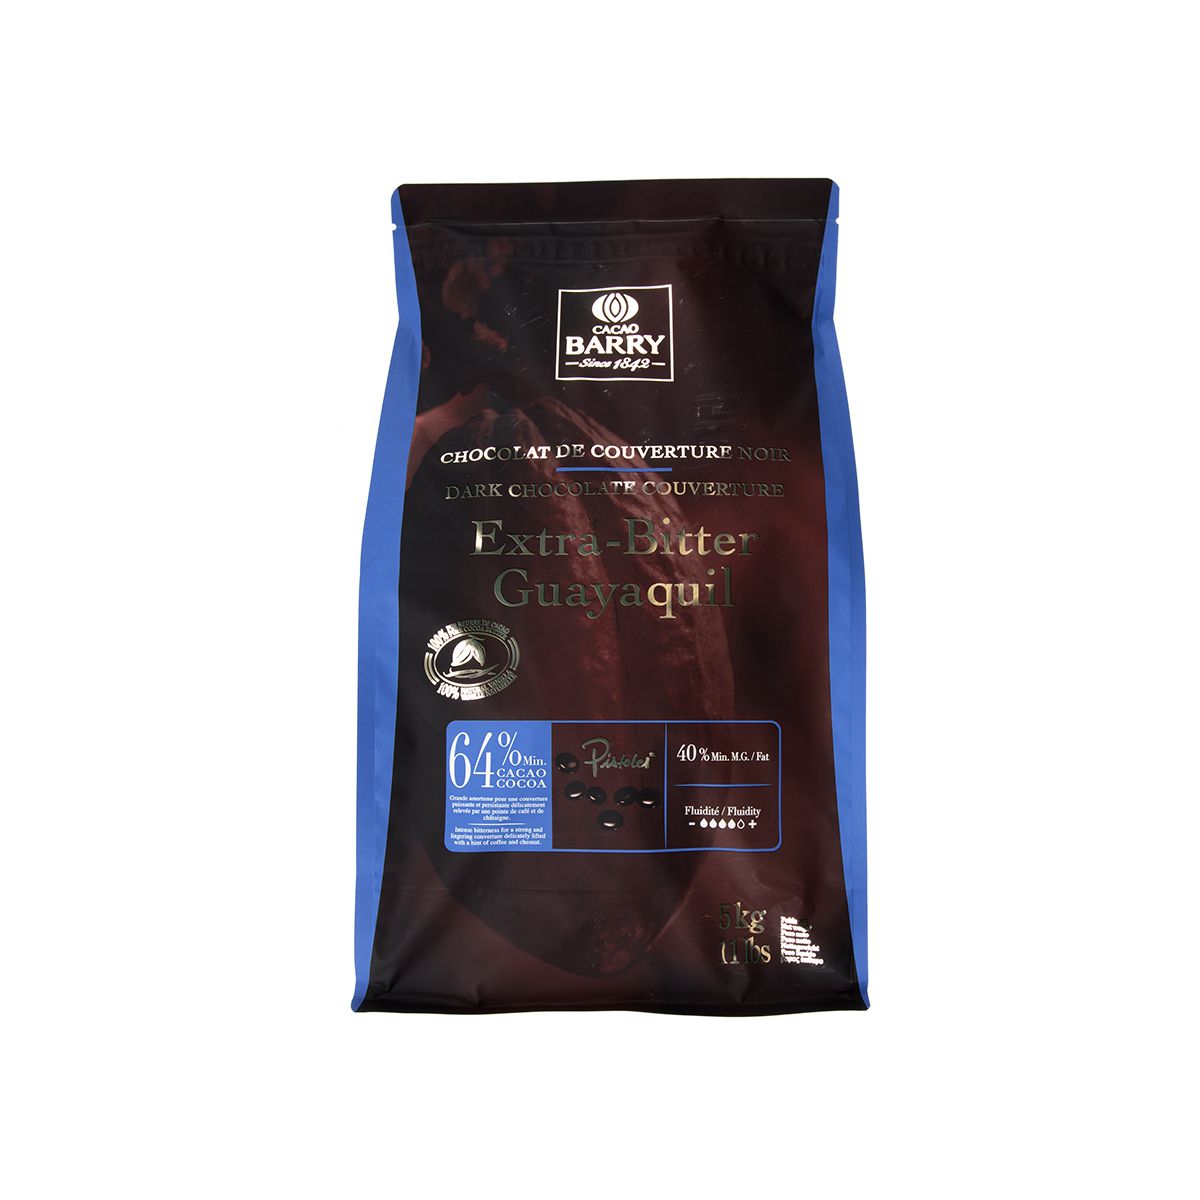 Cacao Barry Guayaquil Extra Bitter 64% Pistole 5 Kg Bag